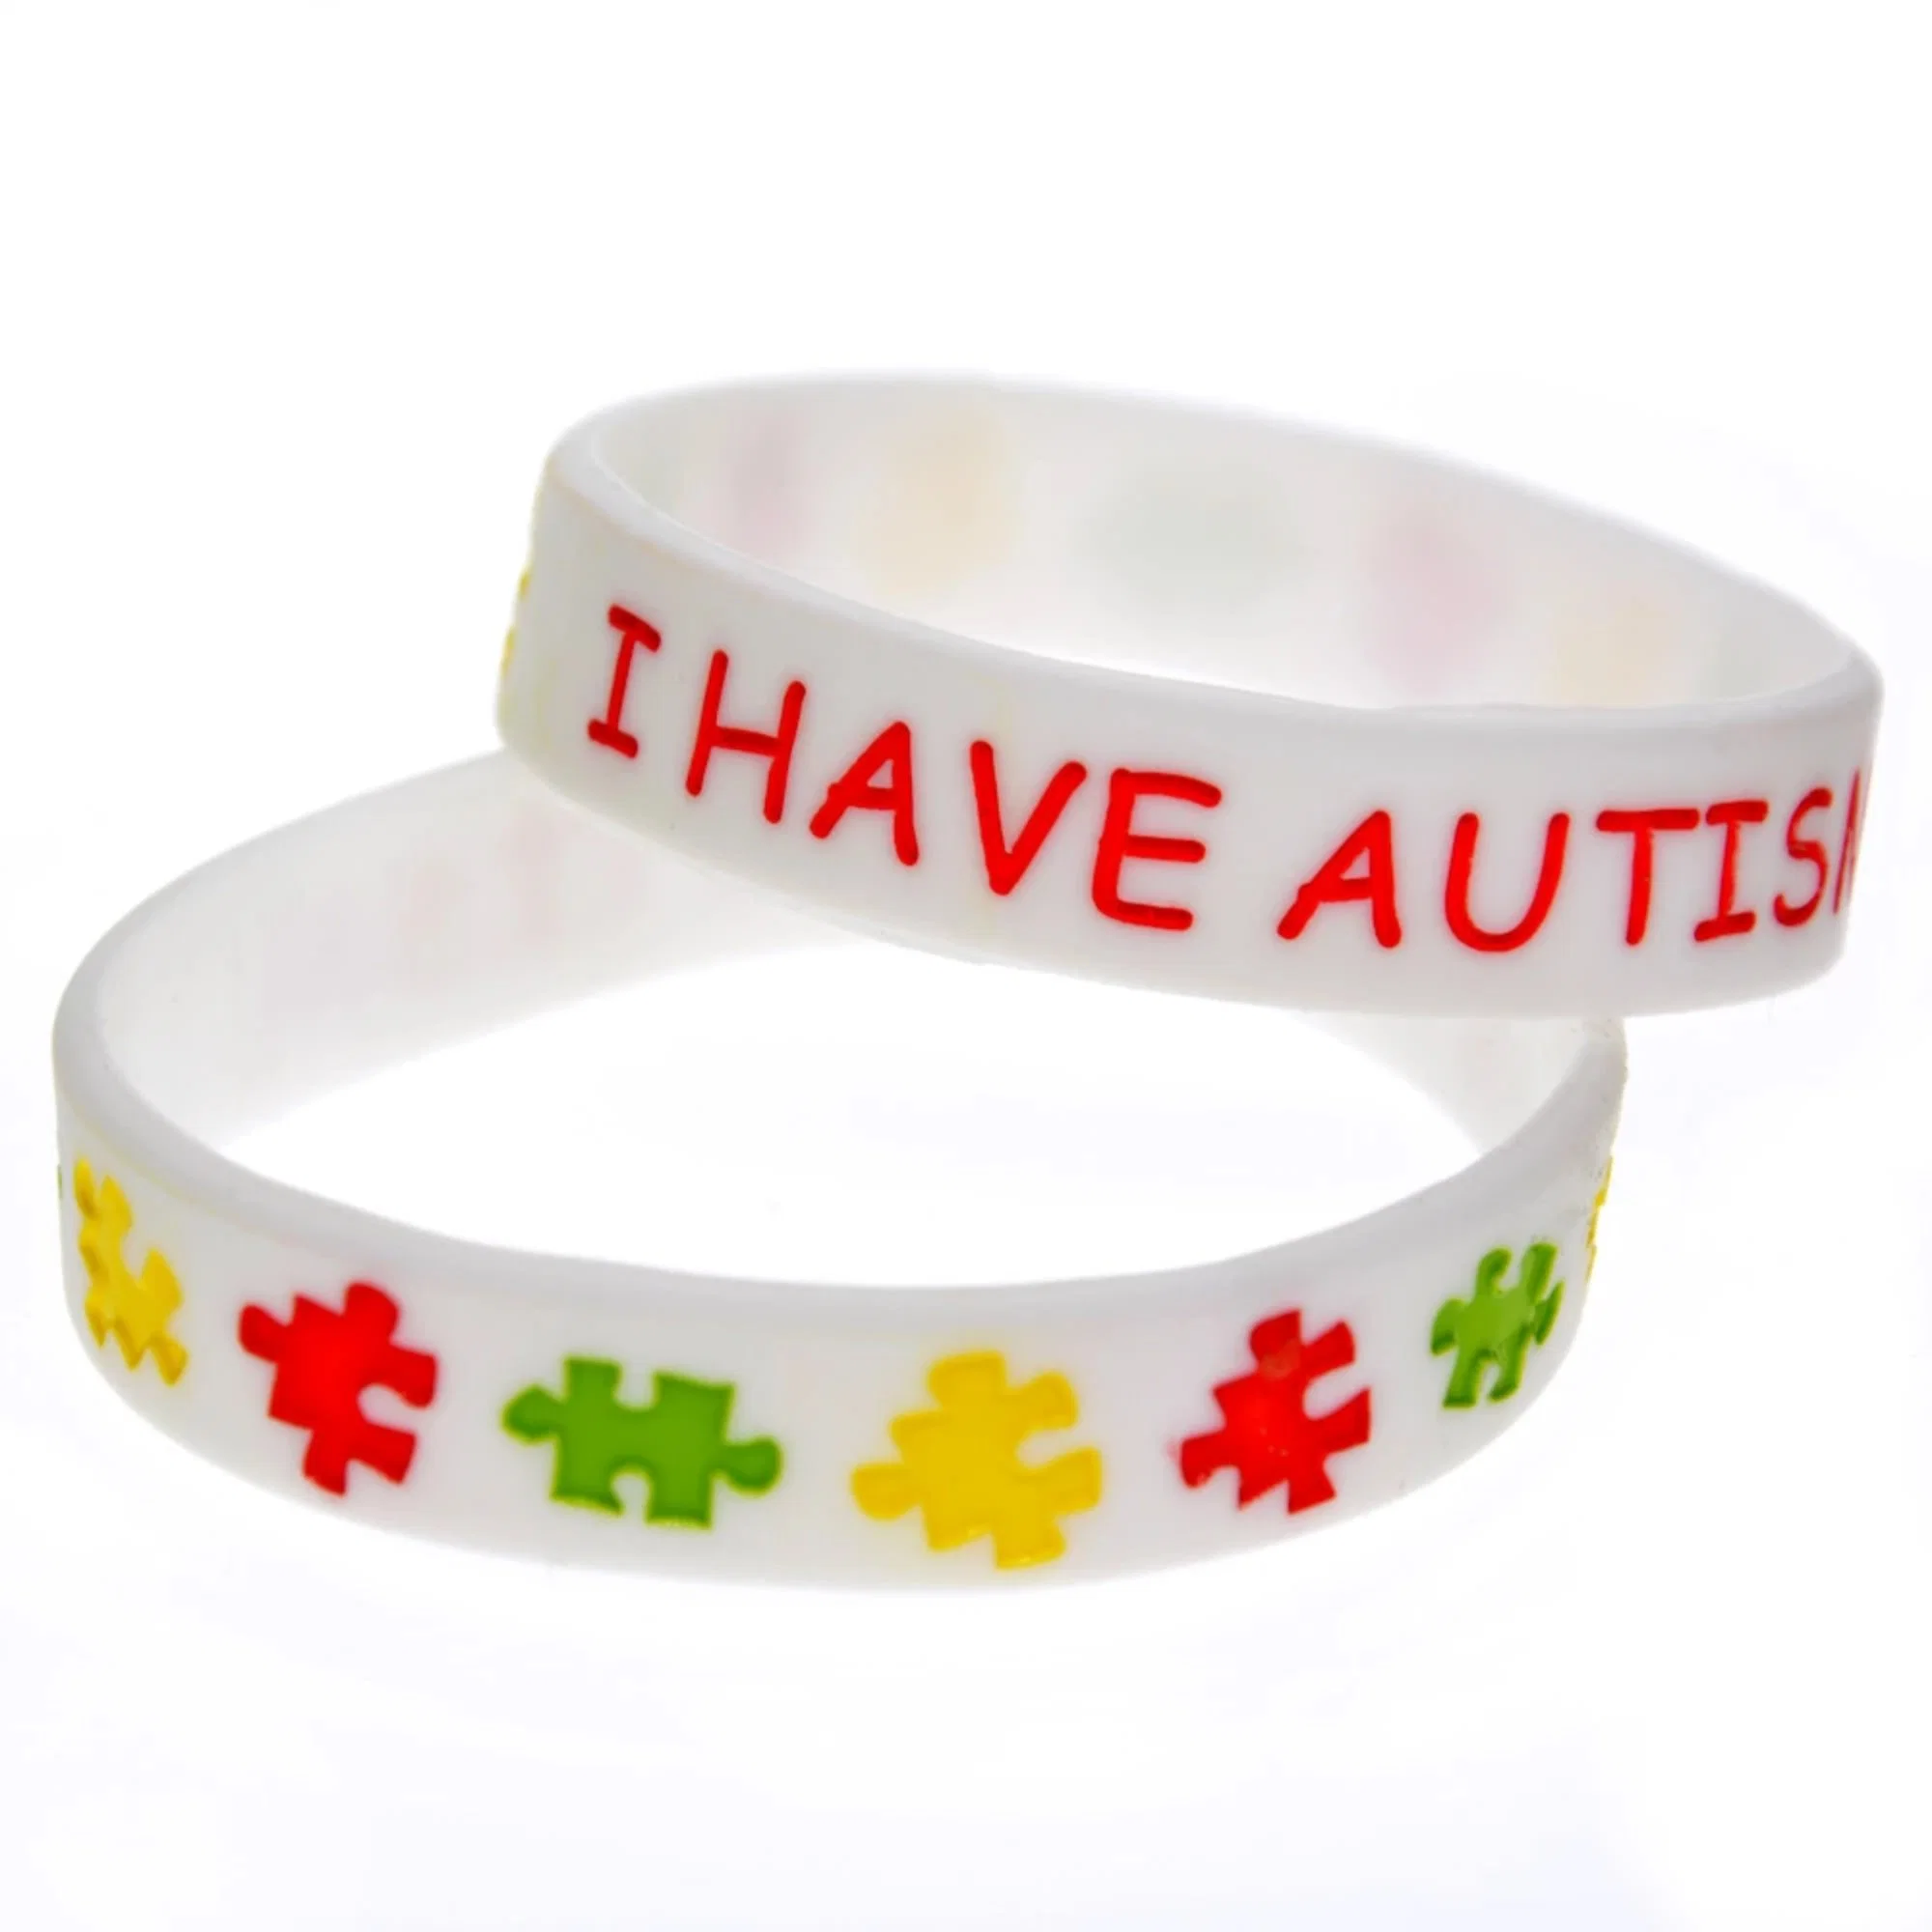 China Wholesale Autism Awakeness Love Support 2022 Hot Selling Promotion Gift High Quality Custom Silicone Wristband